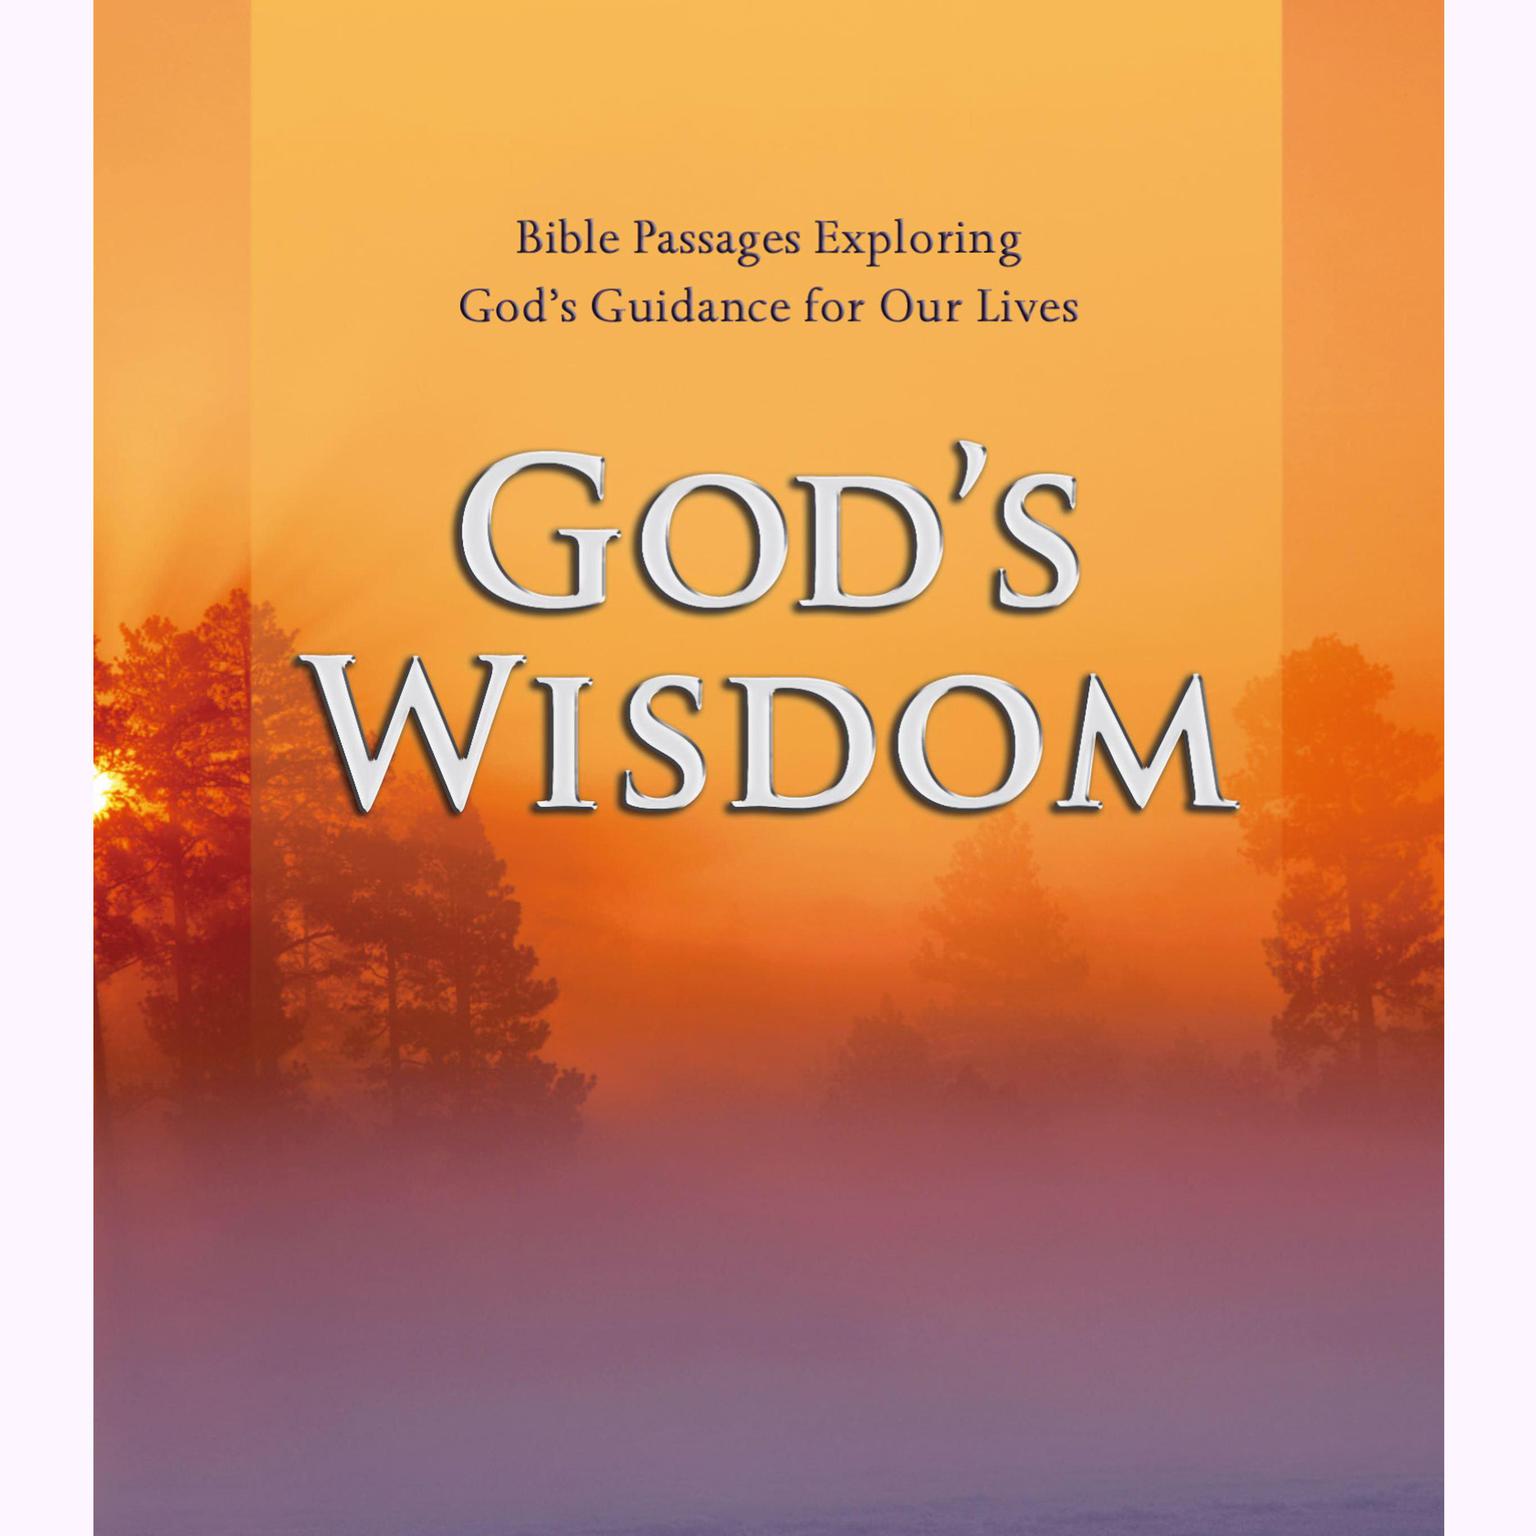 Gods Wisdom (Abridged): Bible Passages Exploring Gods Guidance for Our Lives Audiobook, by Various 